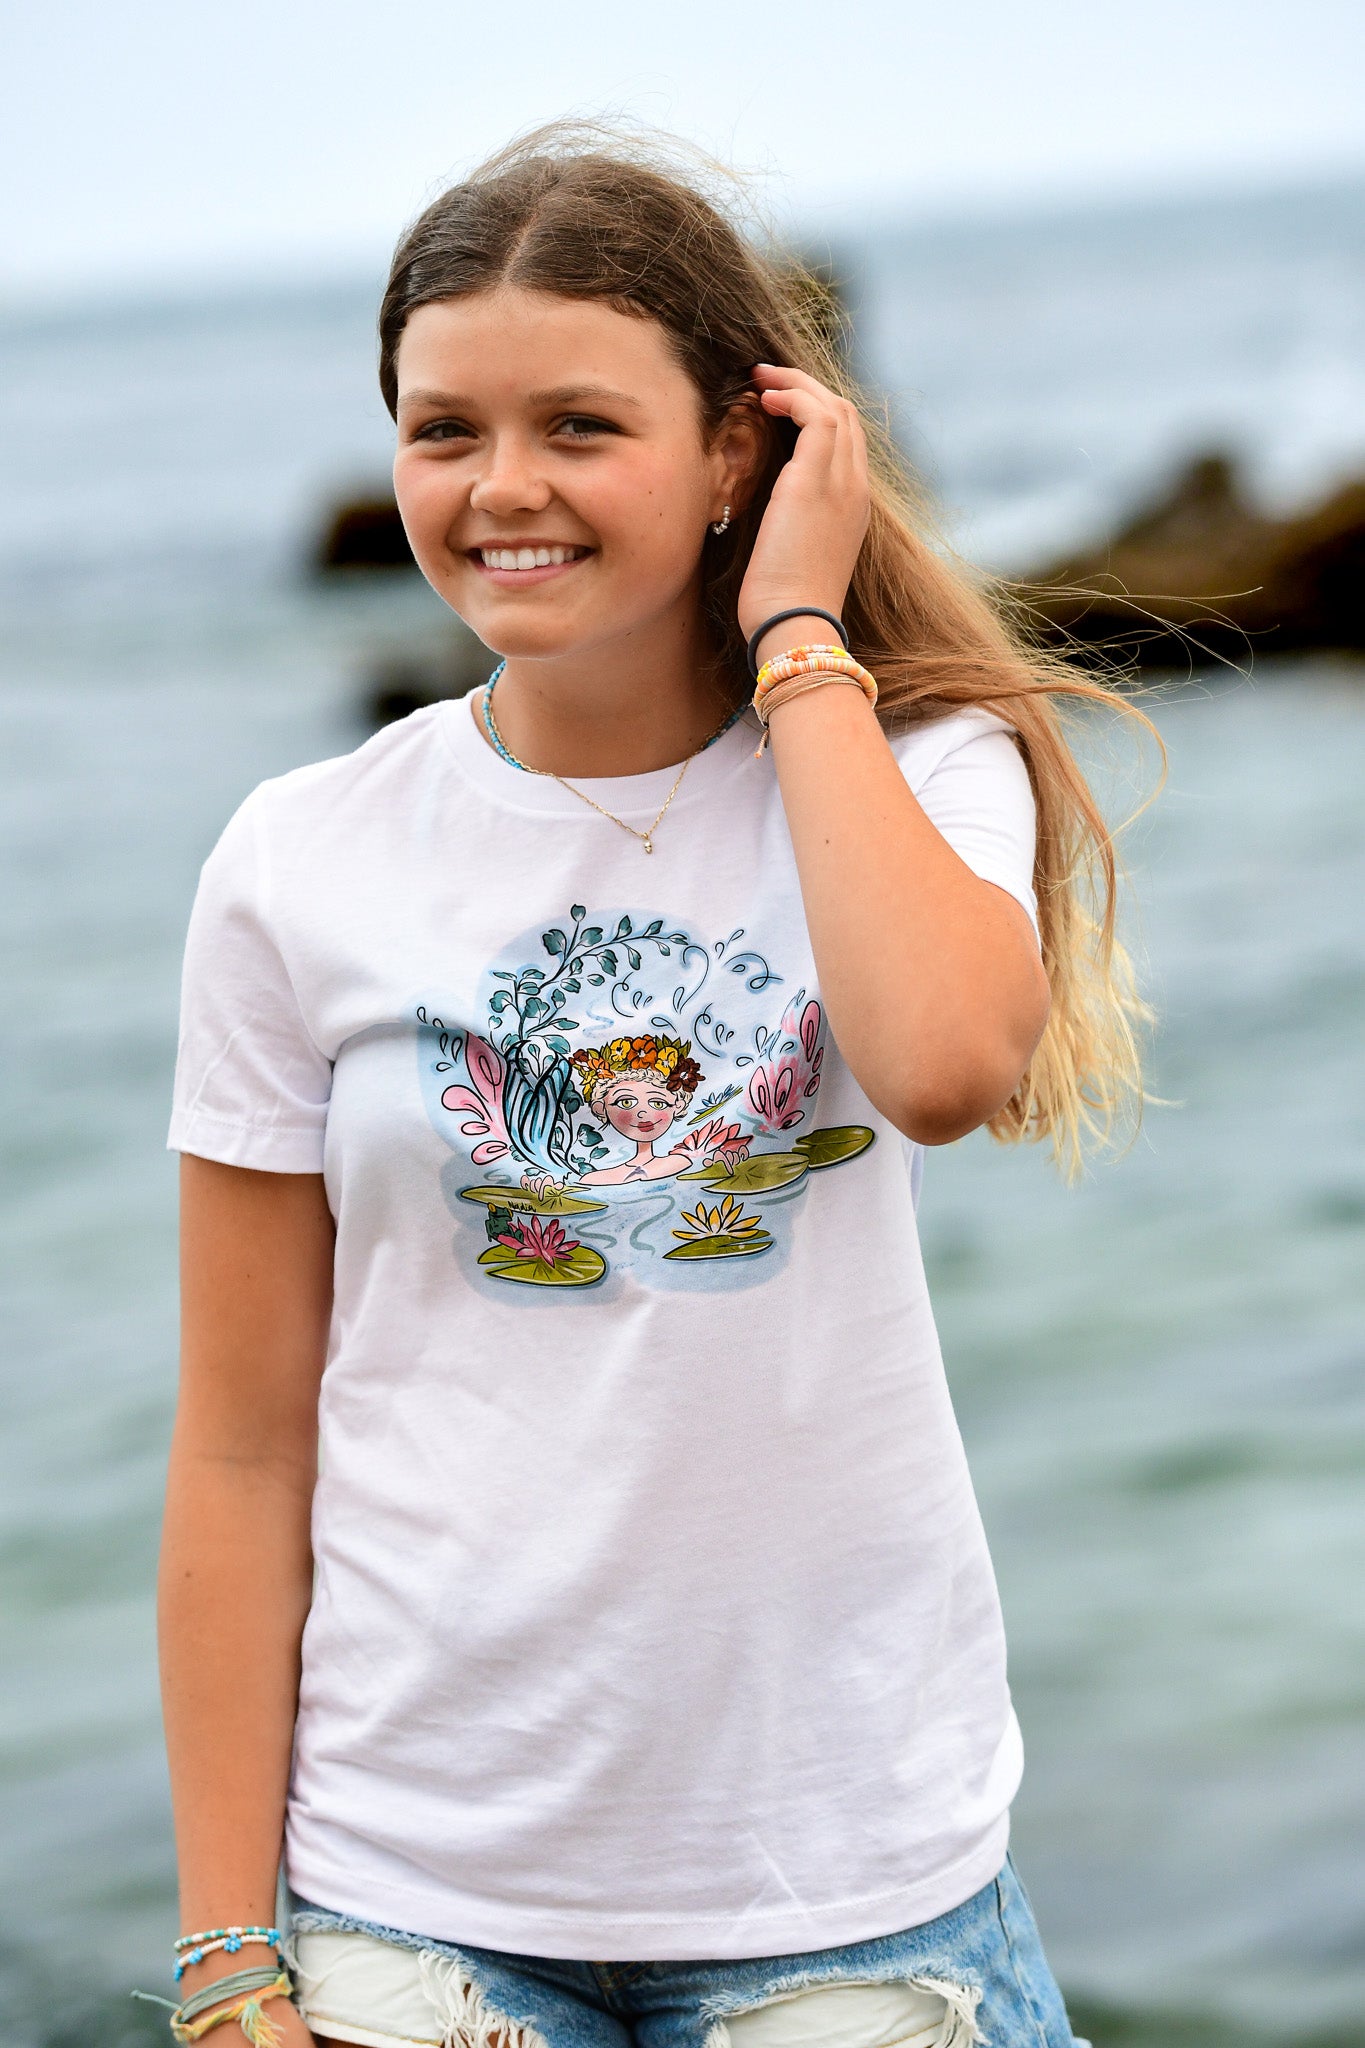 Illustrated graphic tee featuring floral design of a mermaid among water lilies. designed by Nadia Watts